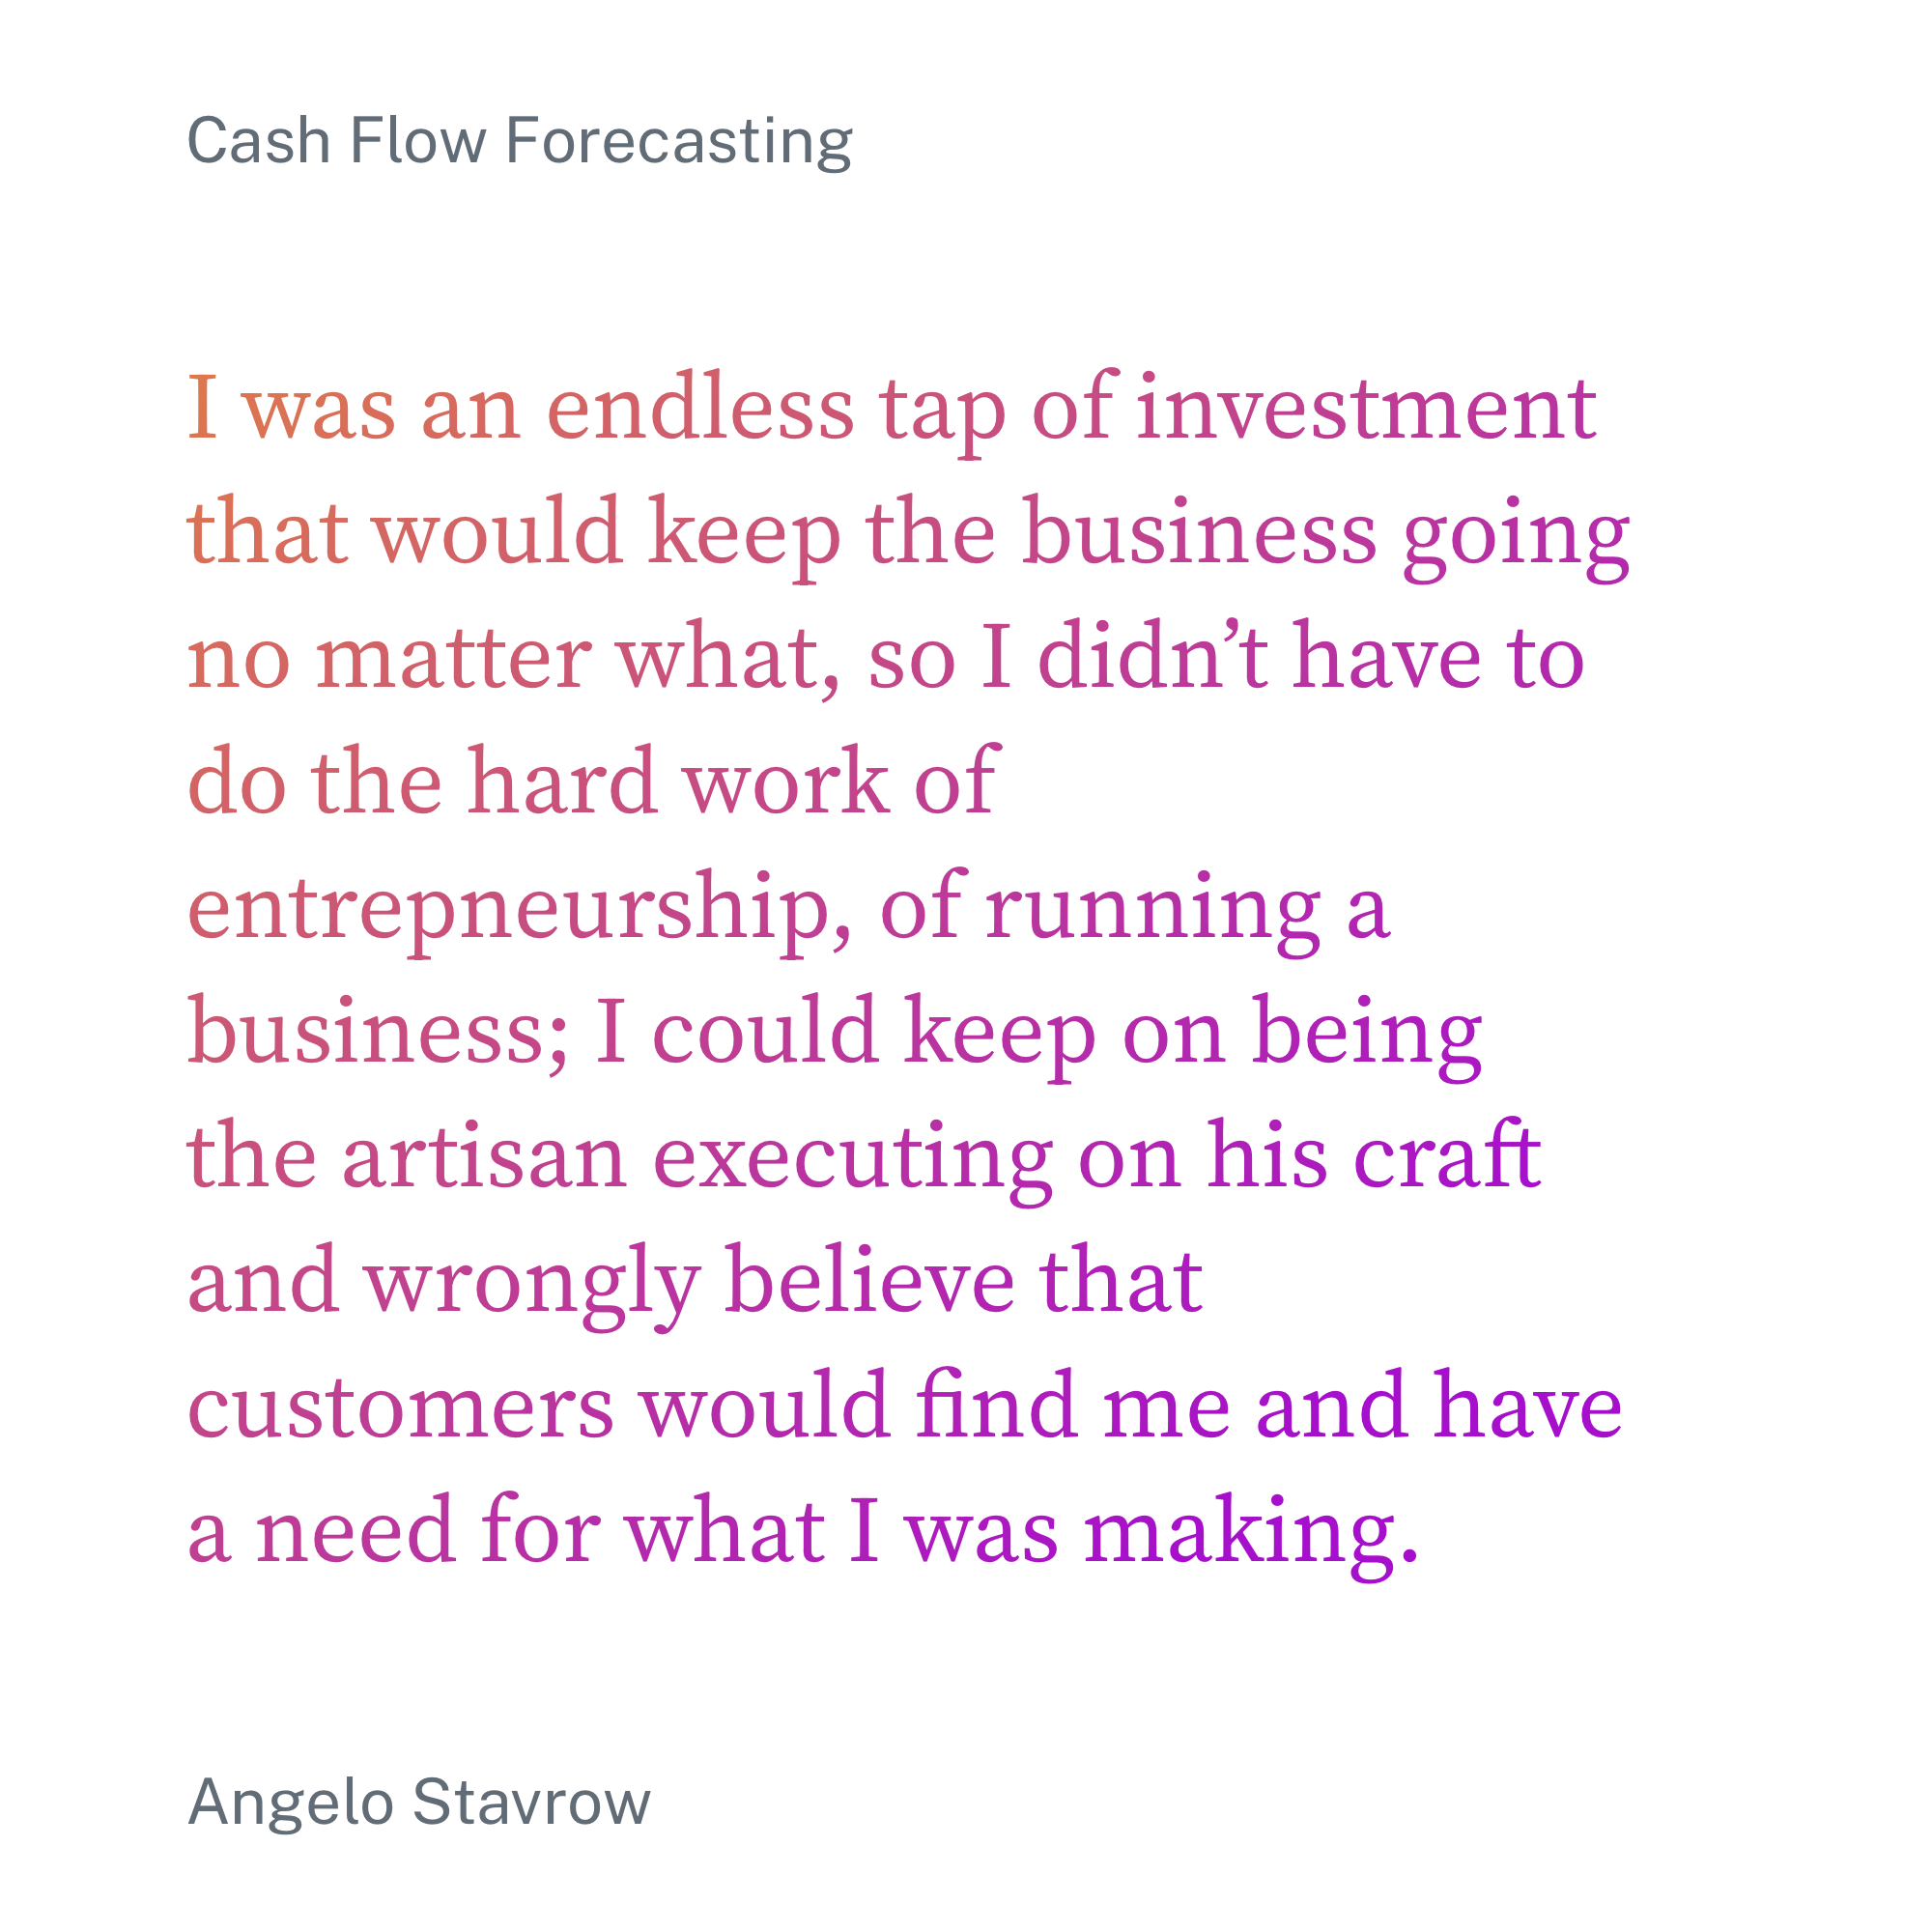 Quoted text: "I was an endless tap of investment that would keep the business going no matter what, so I didn’t have to do the hard work of entrepneurship, of running a business; I could keep on being the artisan executing on his craft and wrongly believe that customers would find me and have a need for what I was making."